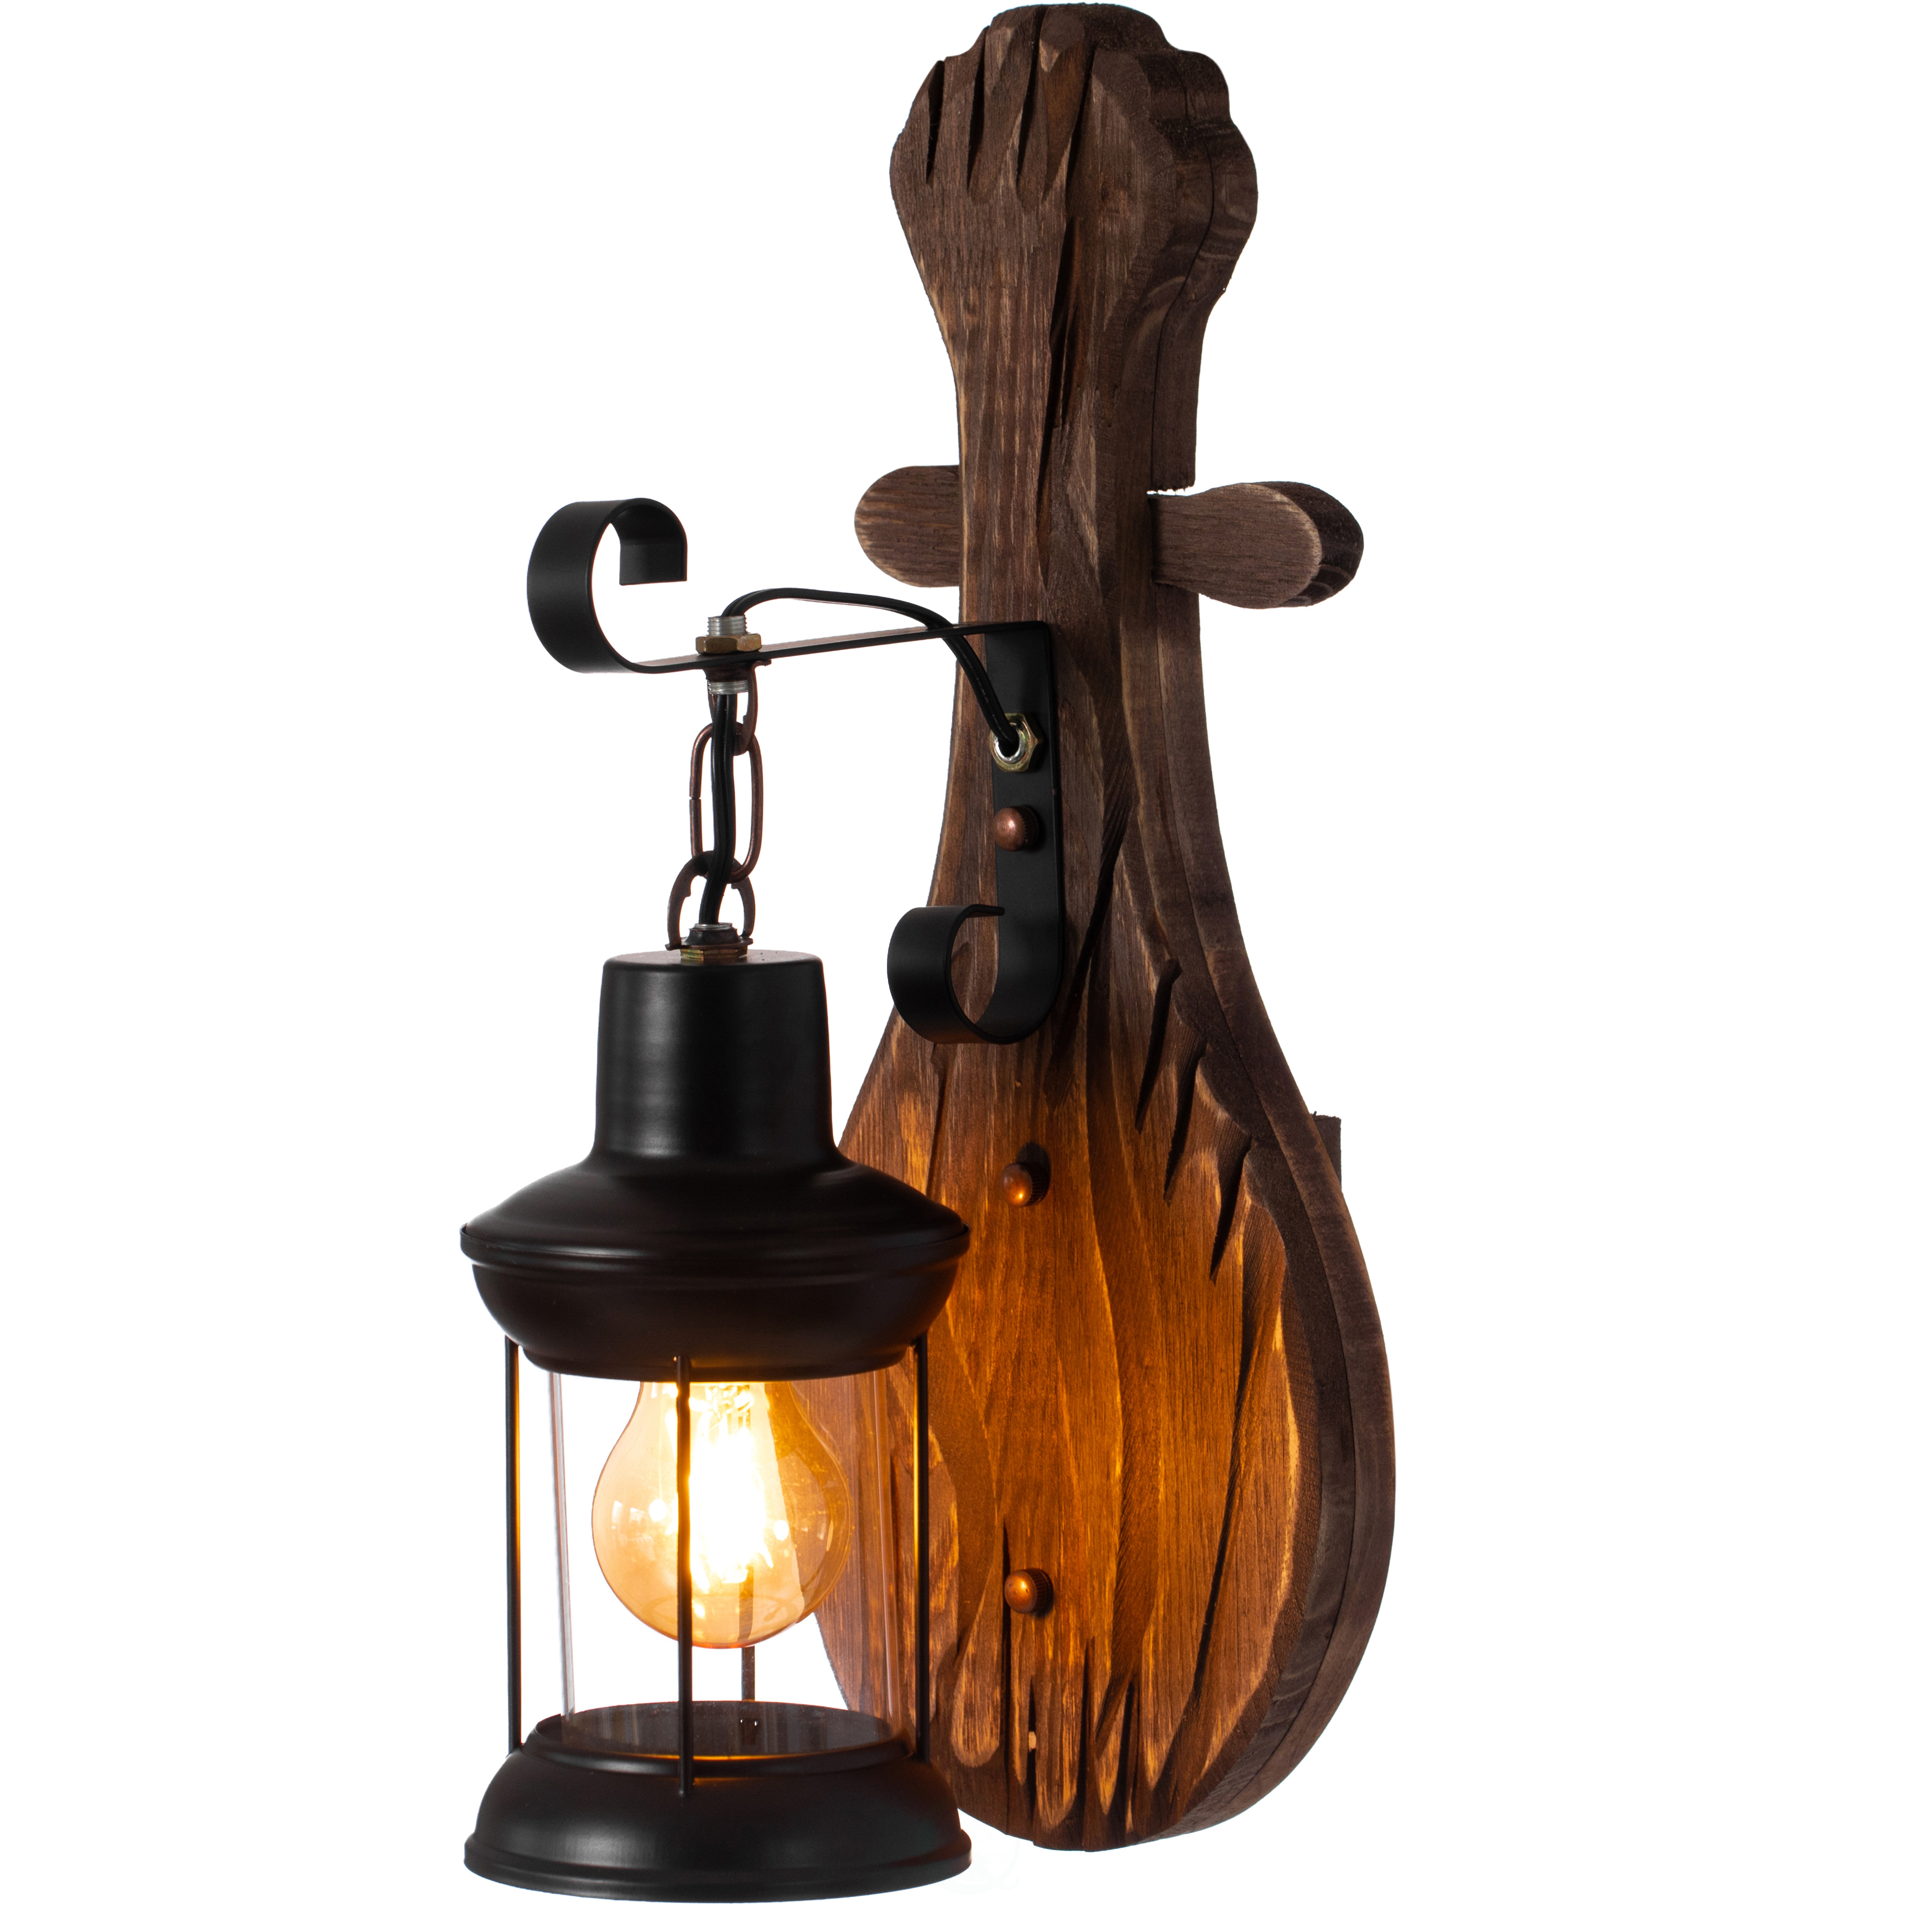 Vintage Industrial Unique Shape Wooden Wall Lamp, Wall Sconce Light for Home, Restaurant or Bar